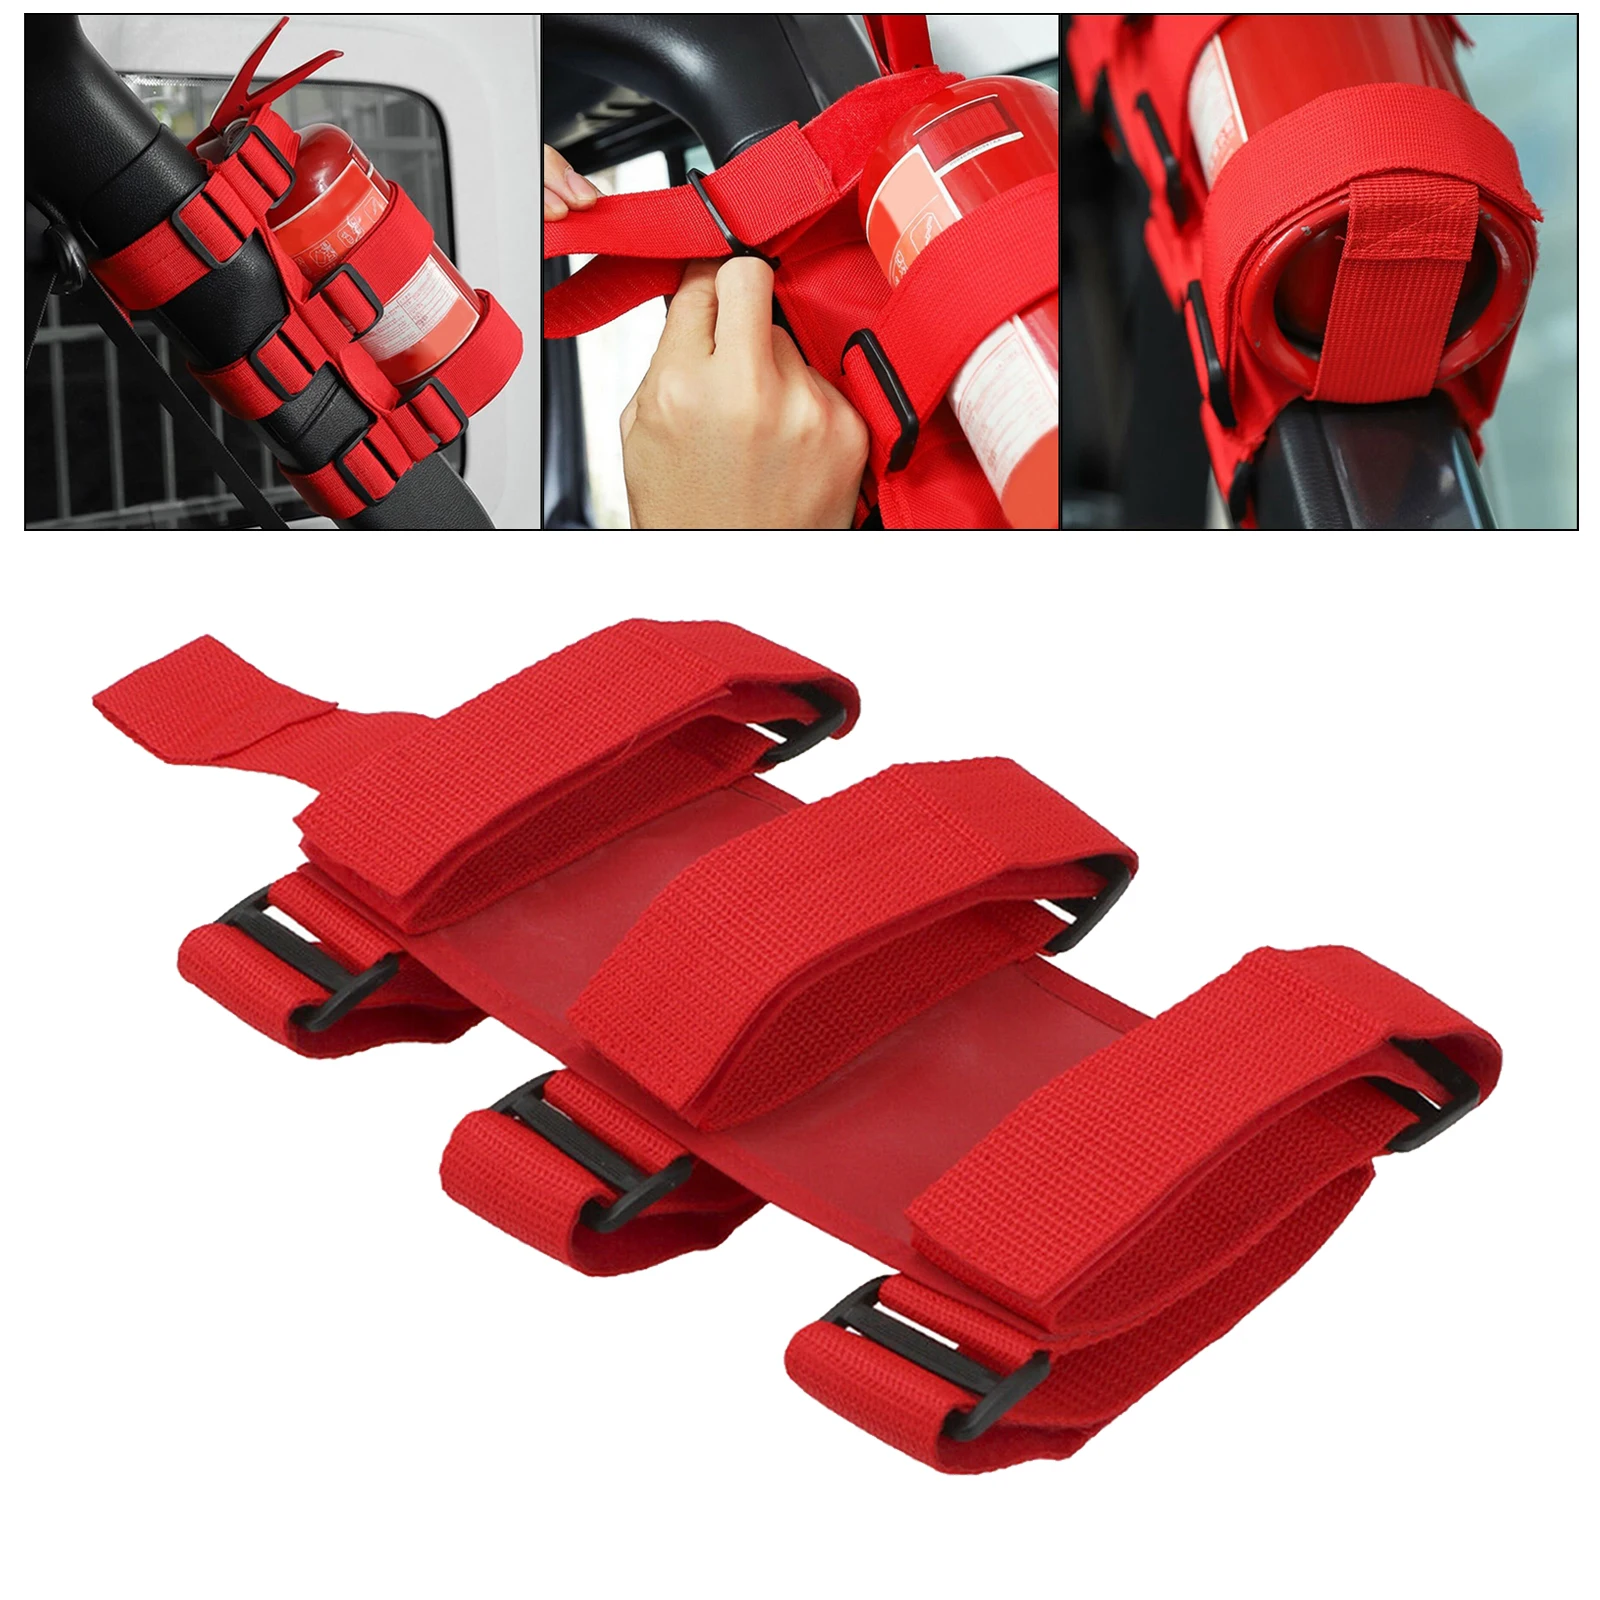 Adjustable Roll Bar Fire Extinguisher Holder Belt for Convenience and Easy to Reach for Jeep Wrangler Accessories